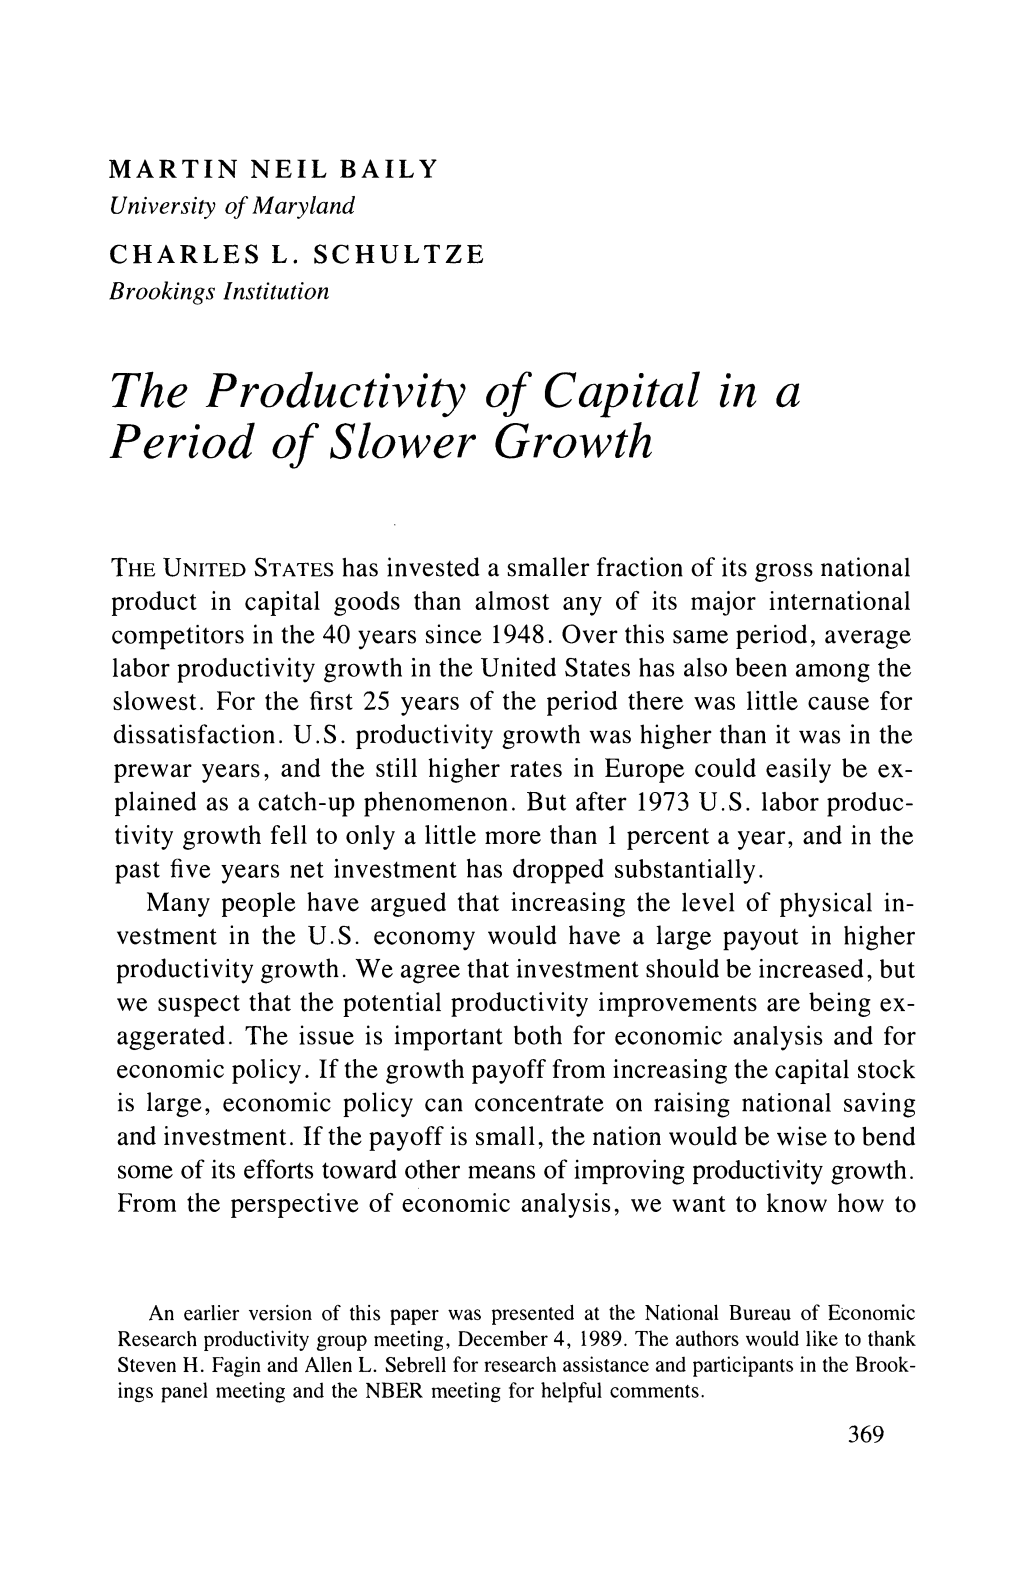 The Productivity of Capital in a Period of Slower Growth